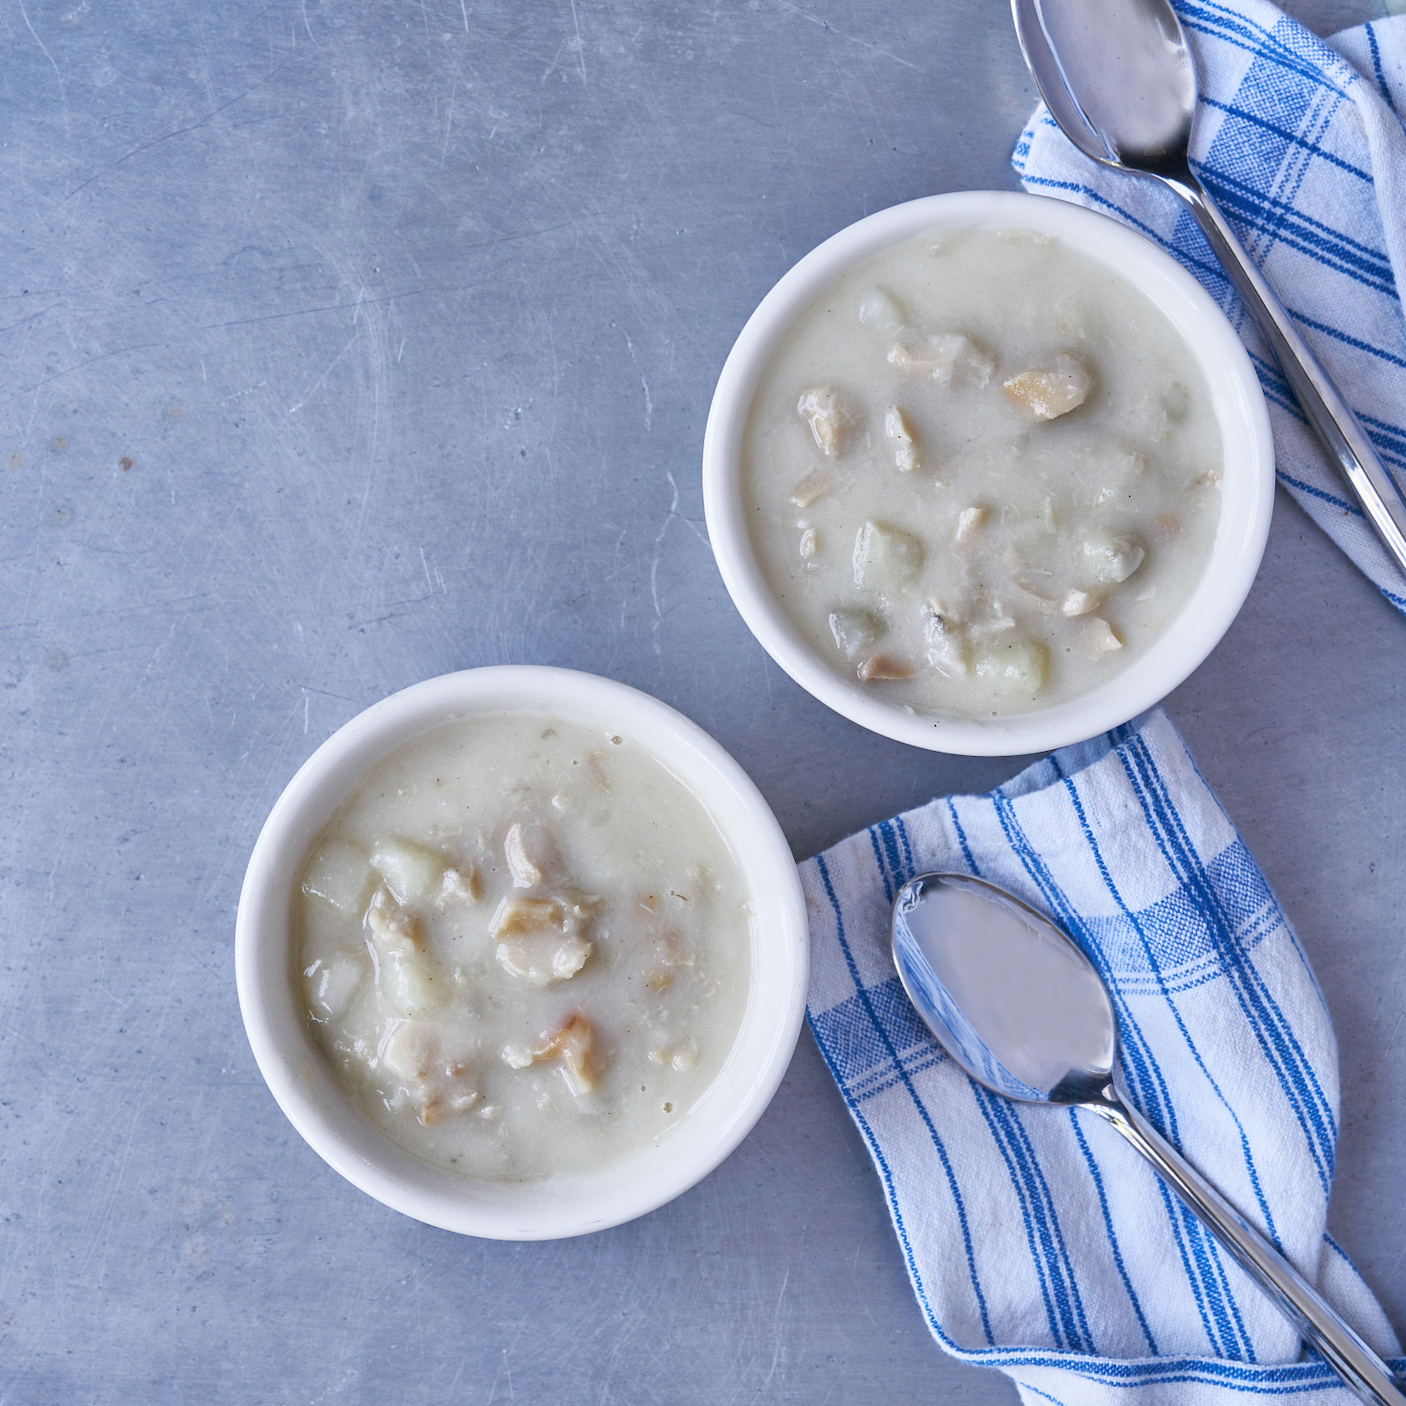 Load image into Gallery viewer, New England Clam Chowder - Serves 4
